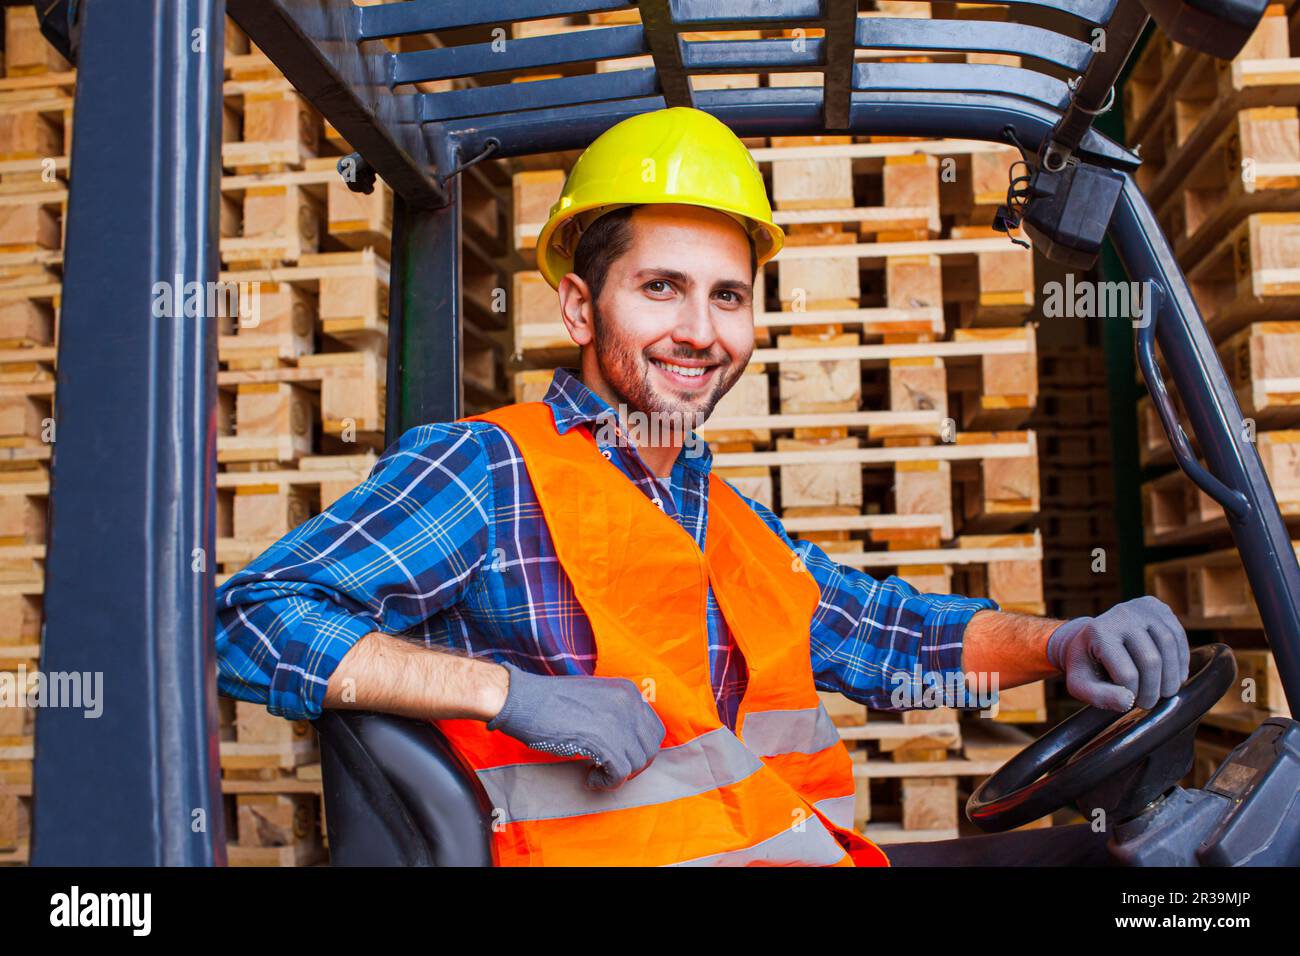 Handsome smiling worker driving forklift in warehouse. Woodworking industry concept. Stock Photo